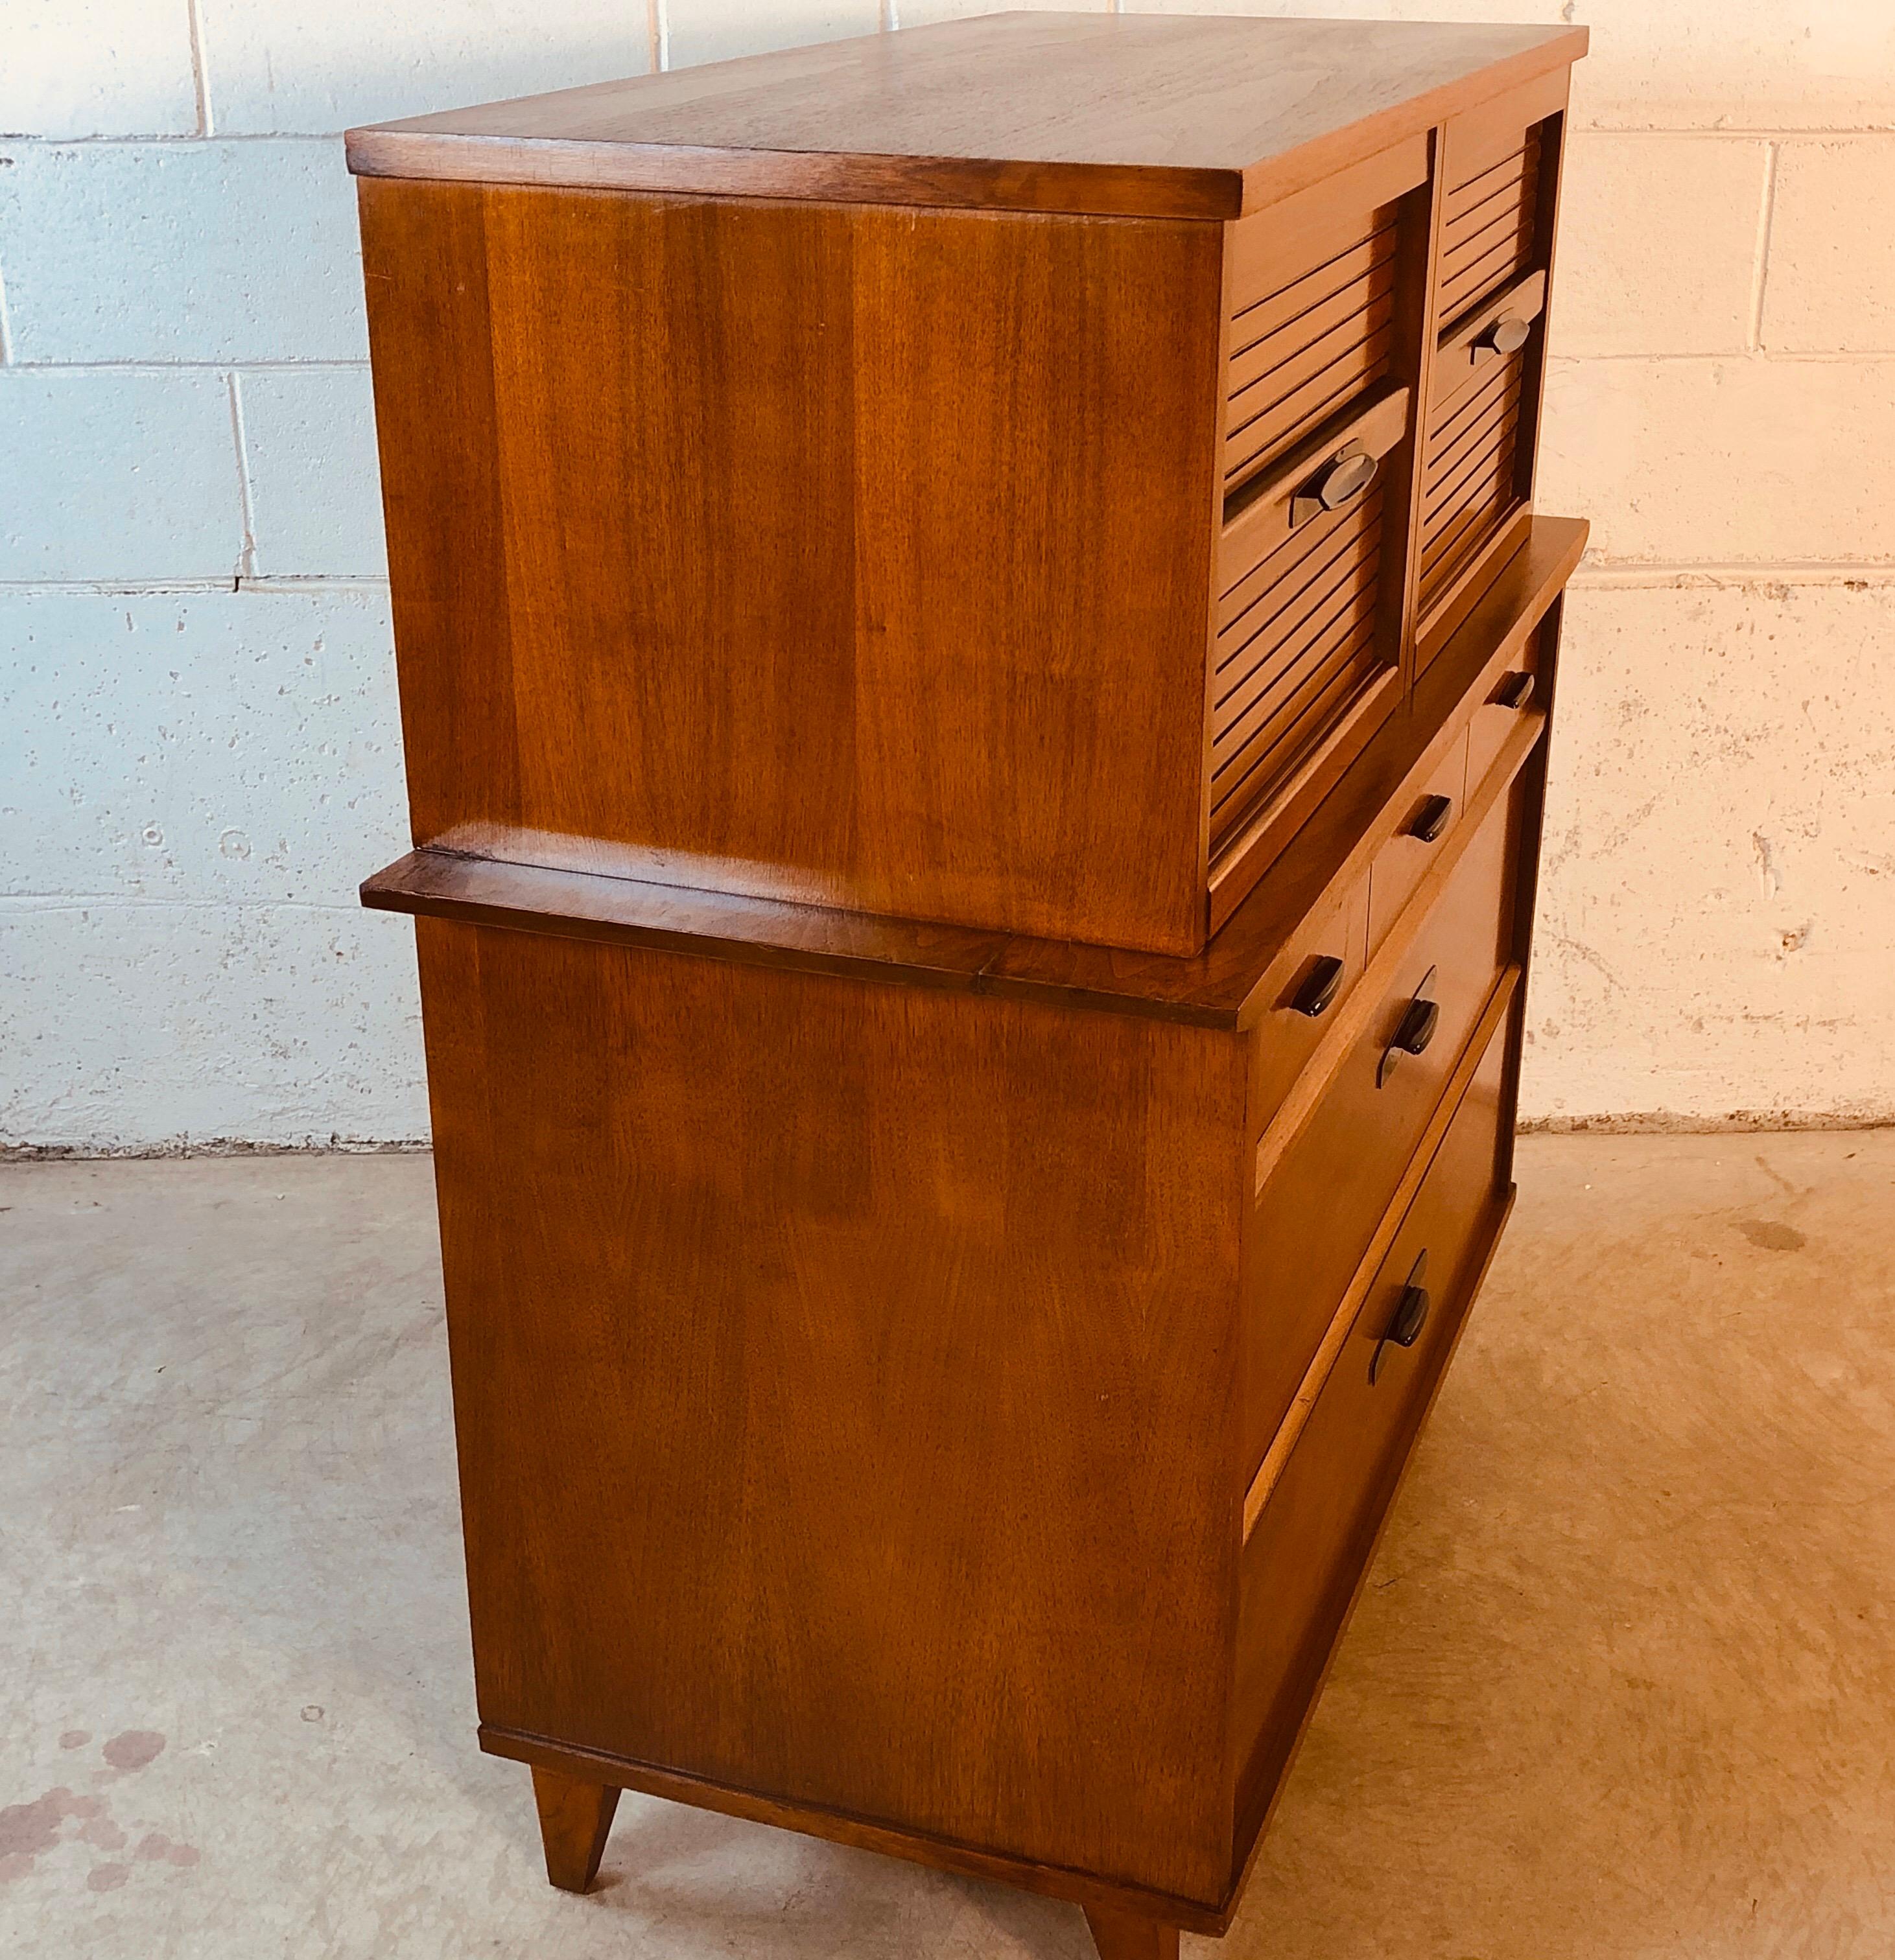 1960s Walnut Wood Tall Bedroom Dresser by Dixie Furniture Co In Good Condition For Sale In Amherst, NH